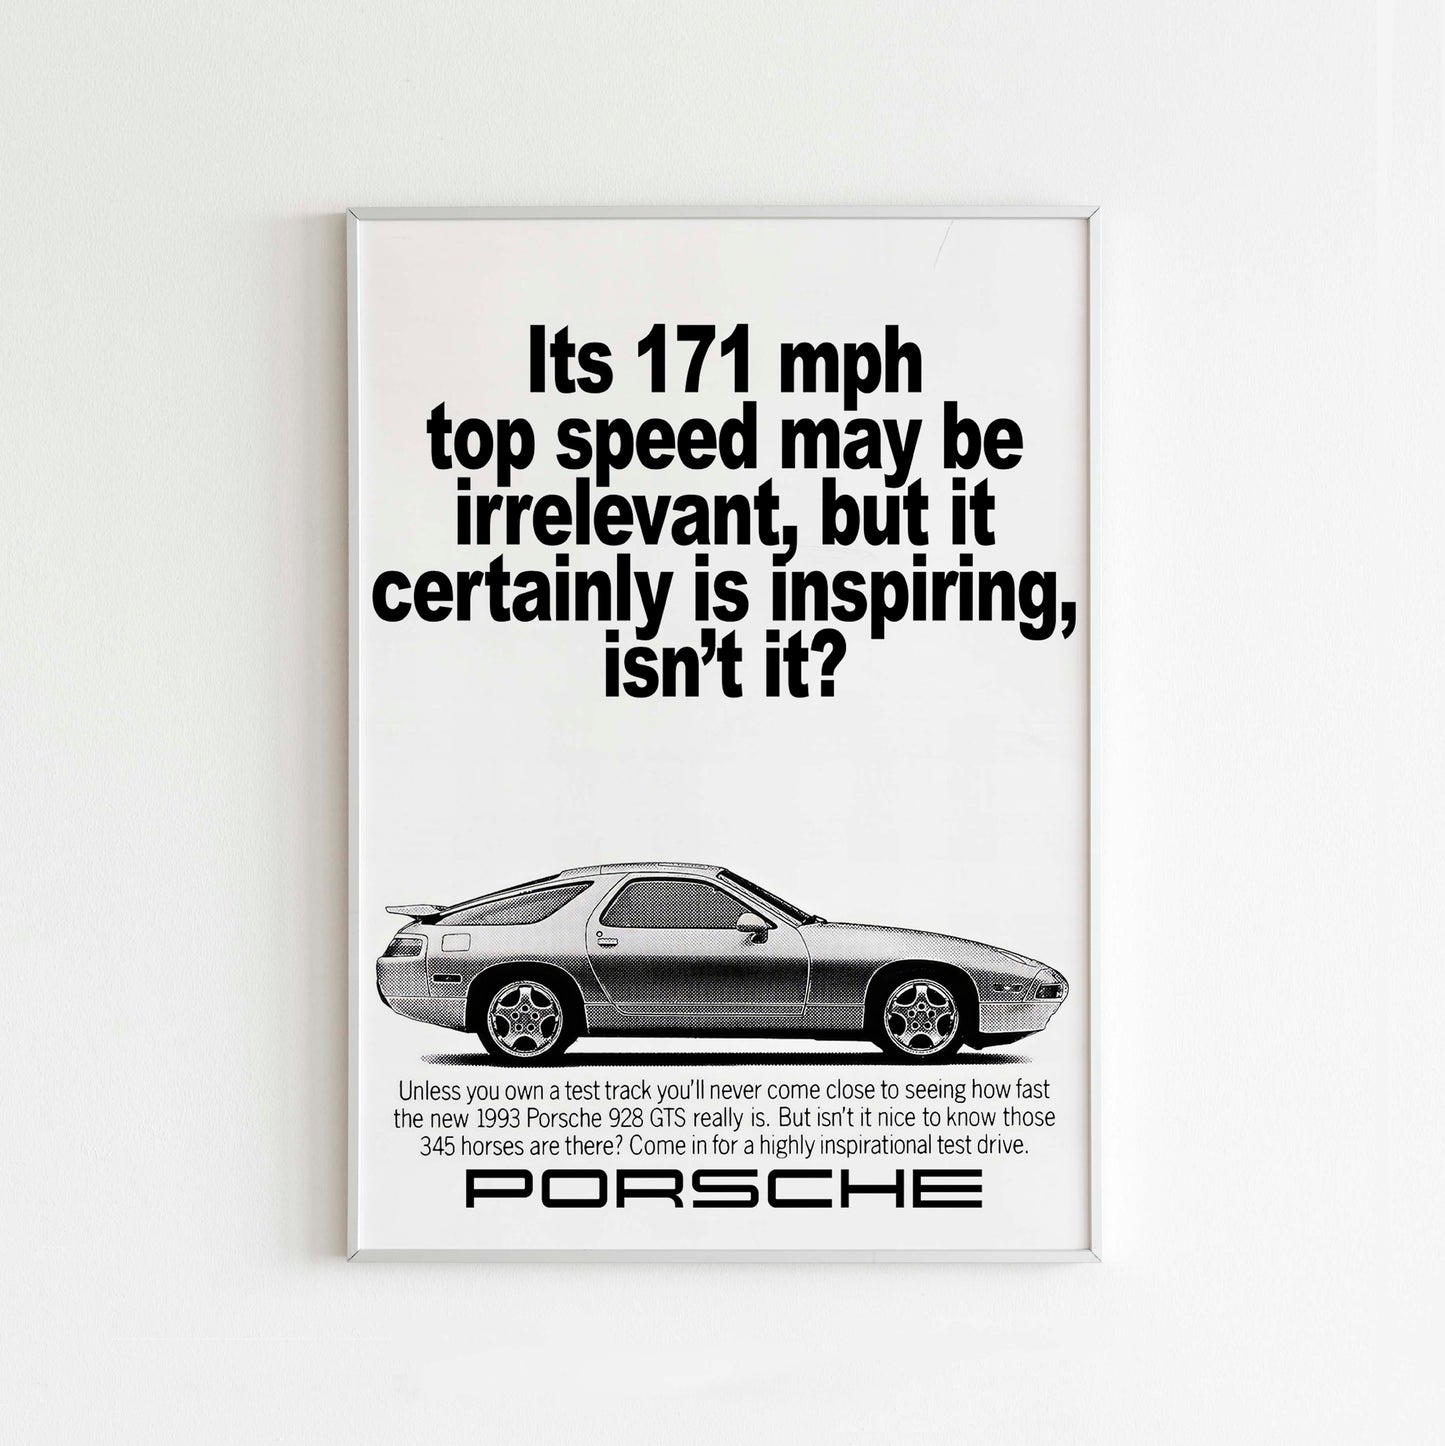 Porsche "Its 171 mph Top Speed May Be Irrelevant" Poster